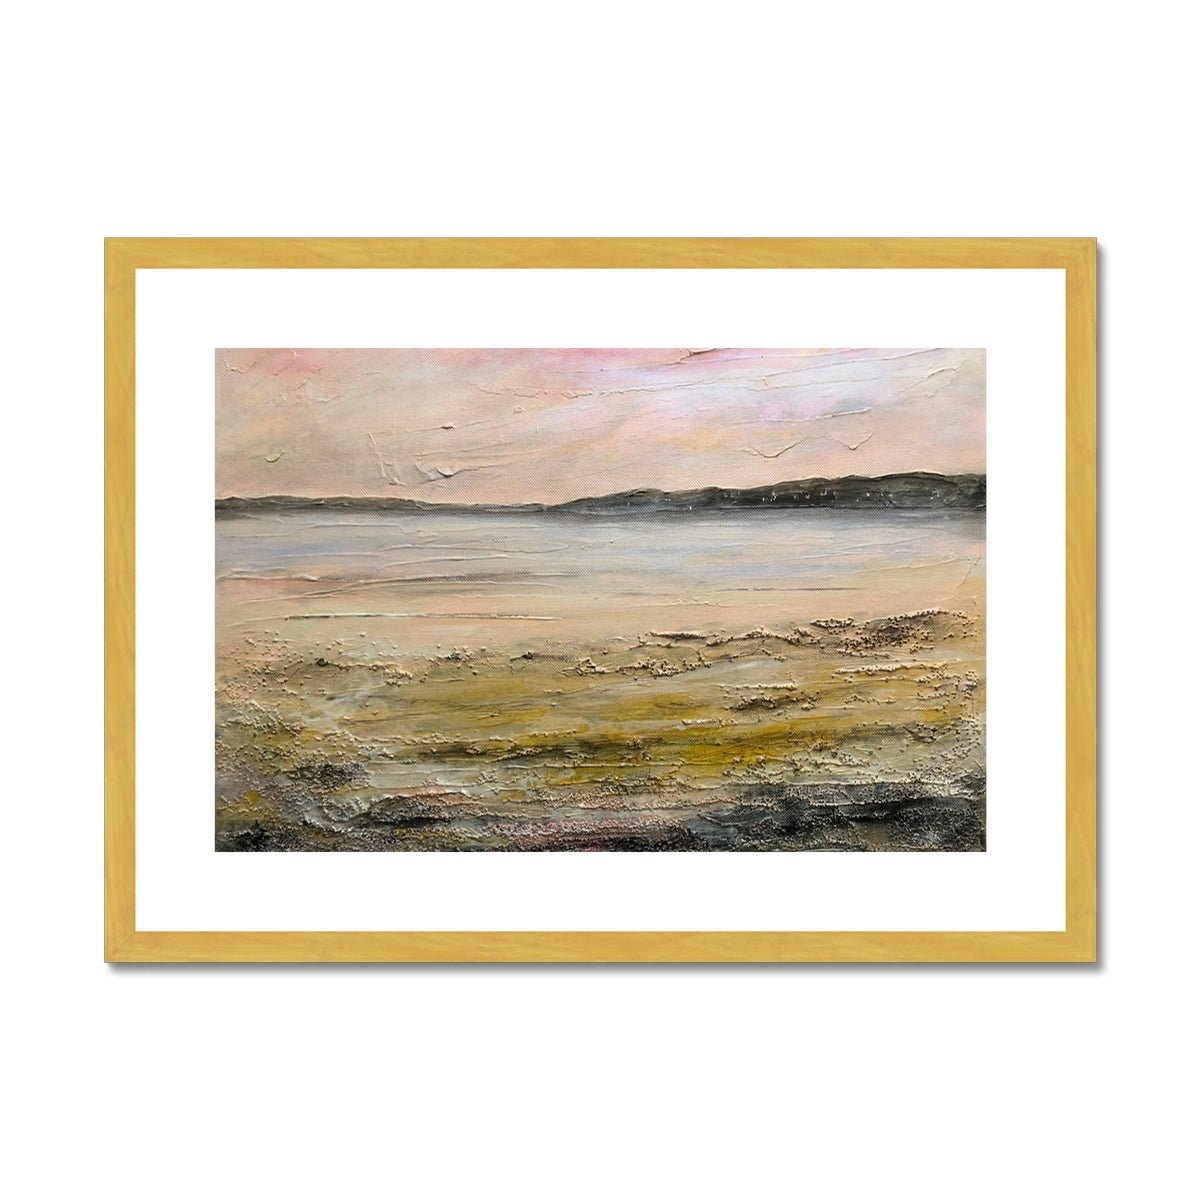 Sandgreen Painting | Antique Framed & Mounted Prints From Scotland-Antique Framed & Mounted Prints-Scottish Highlands & Lowlands Art Gallery-A2 Landscape-Gold Frame-Paintings, Prints, Homeware, Art Gifts From Scotland By Scottish Artist Kevin Hunter